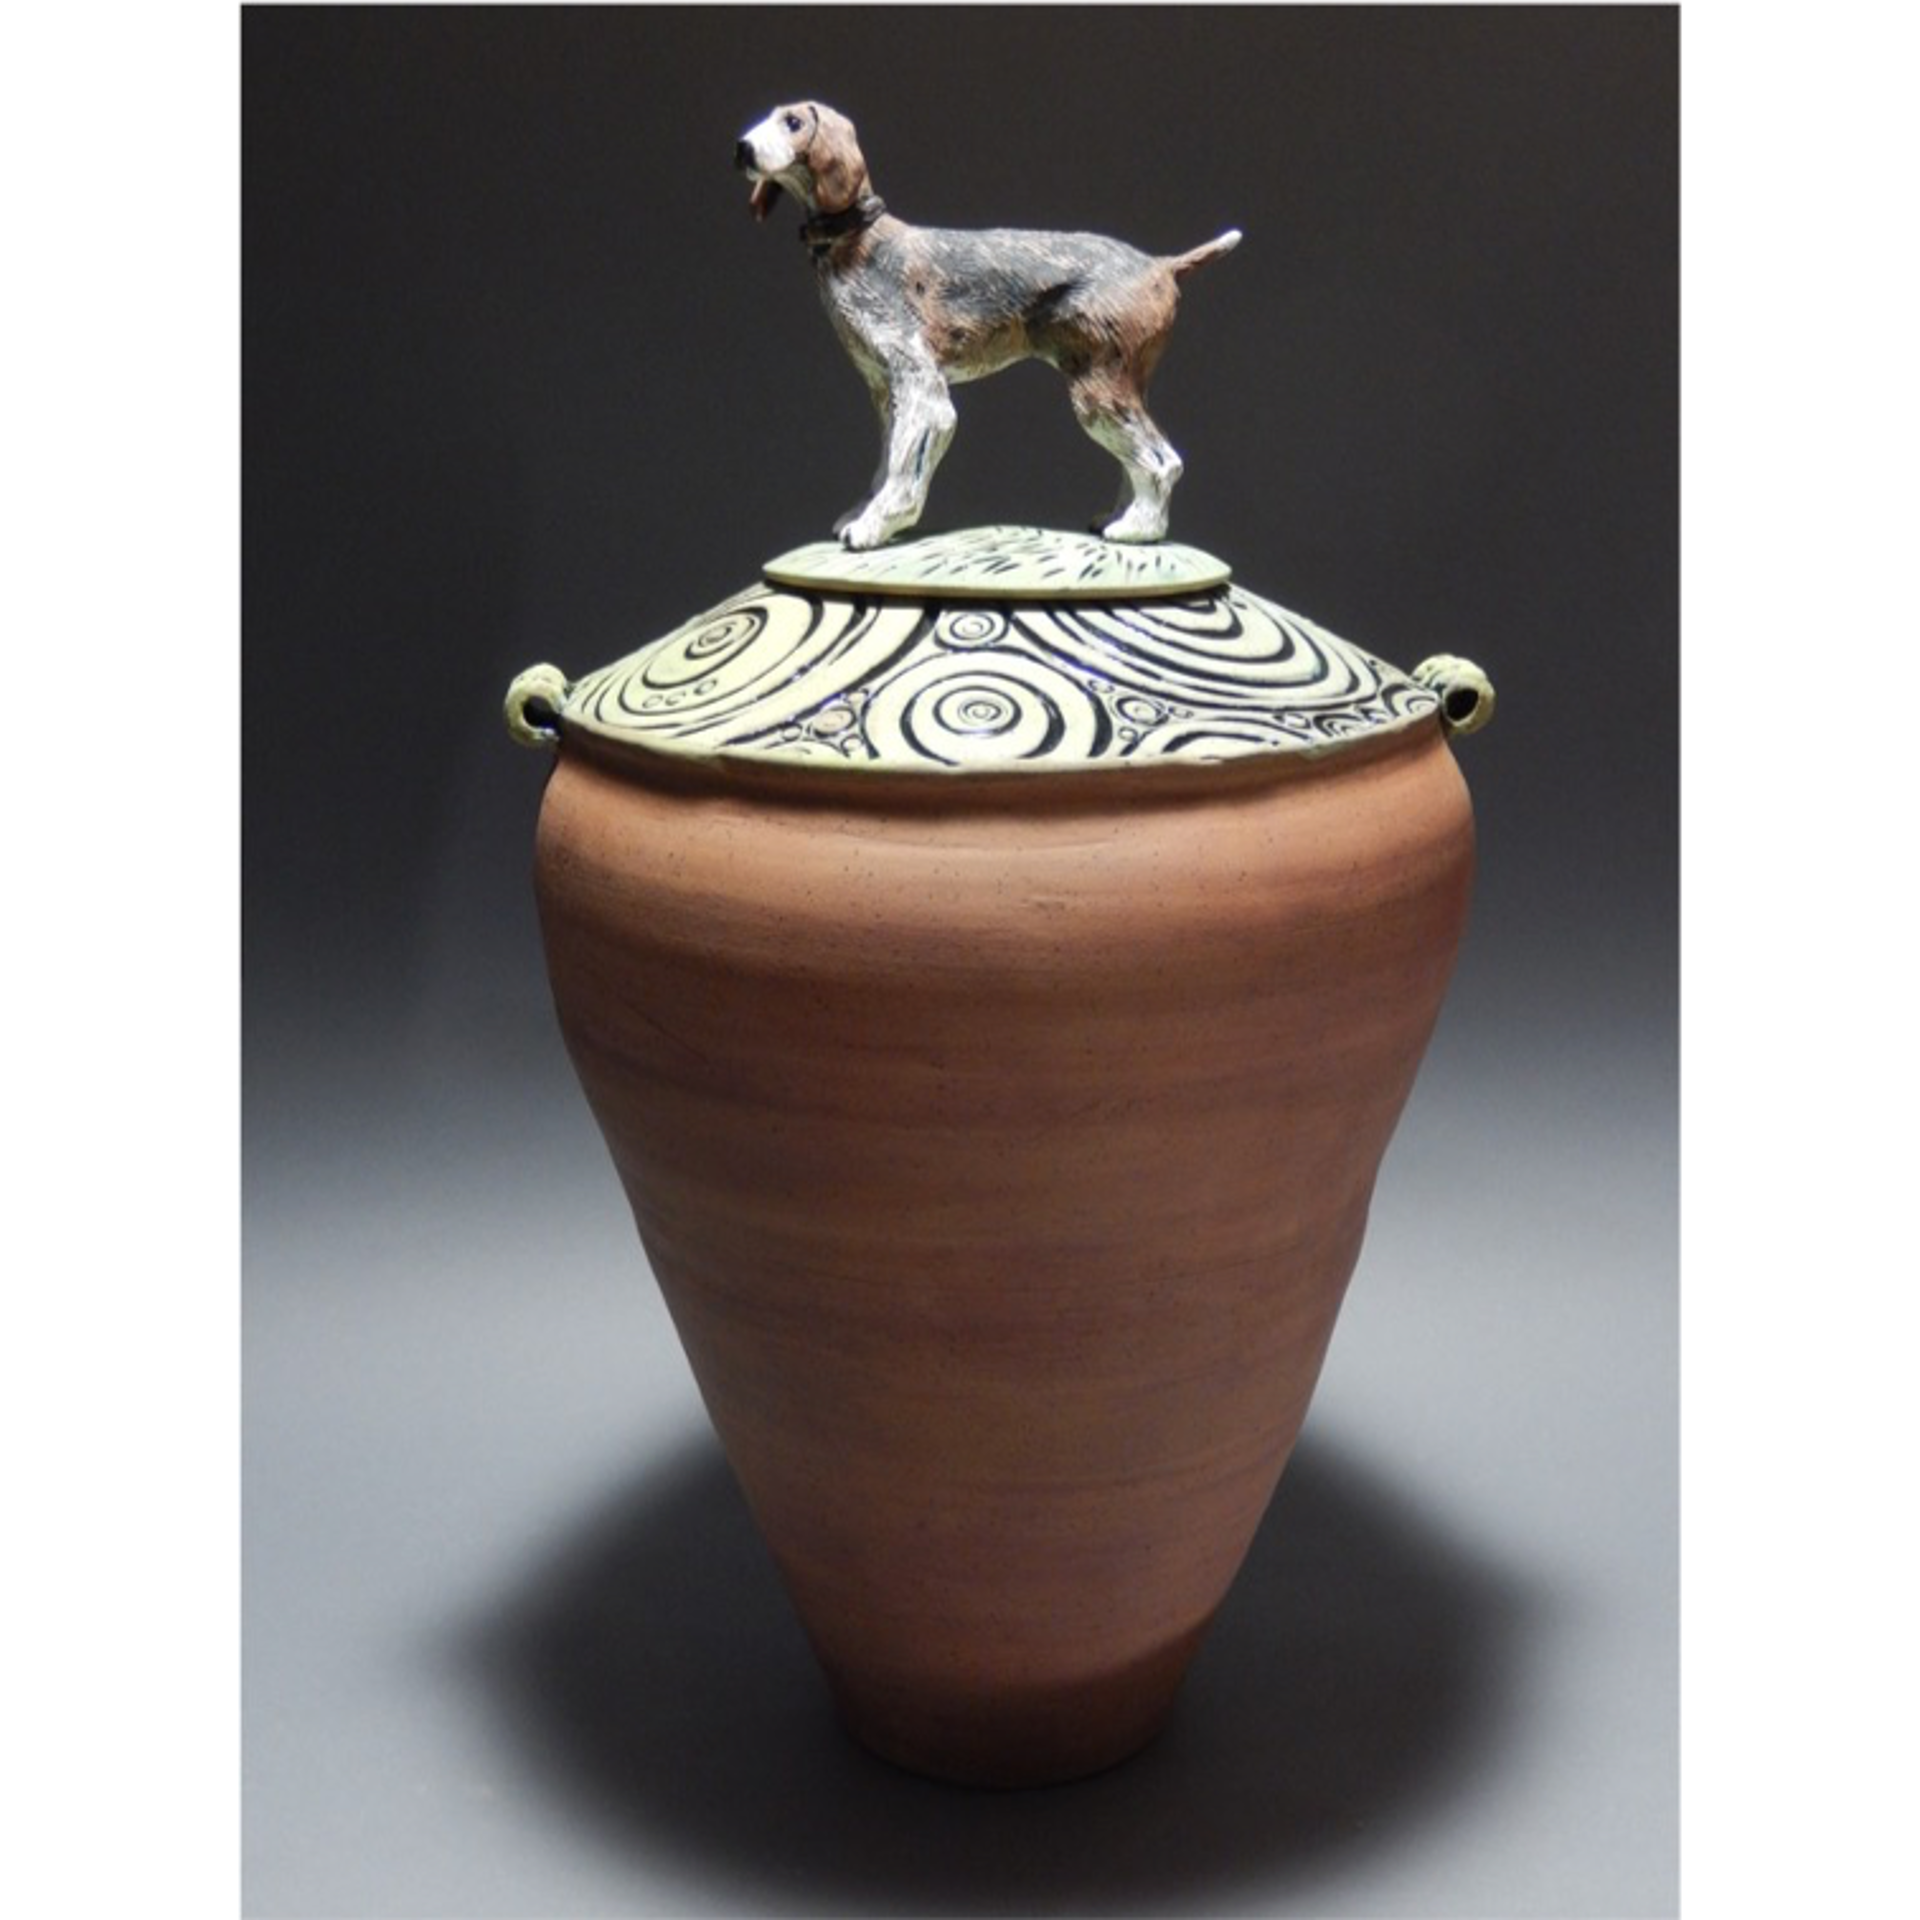 Covered Pot with Dog by Janet Leazenby